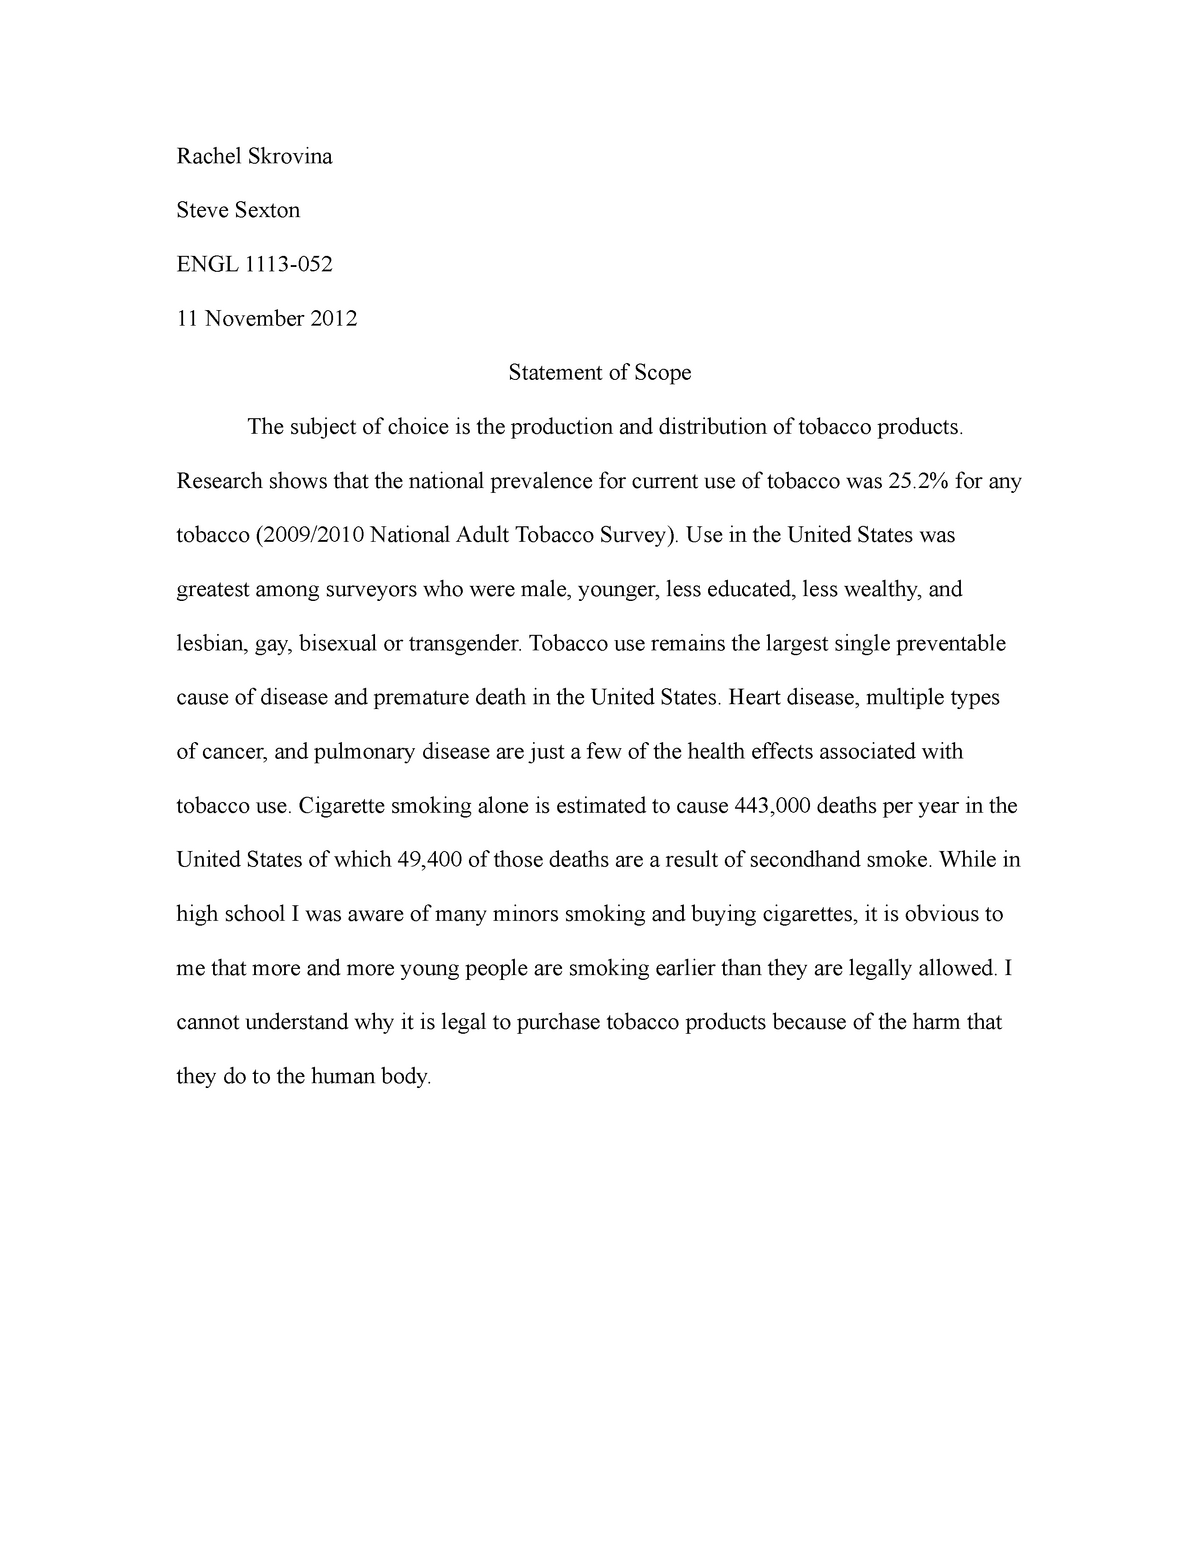 thesis statement about tobacco use